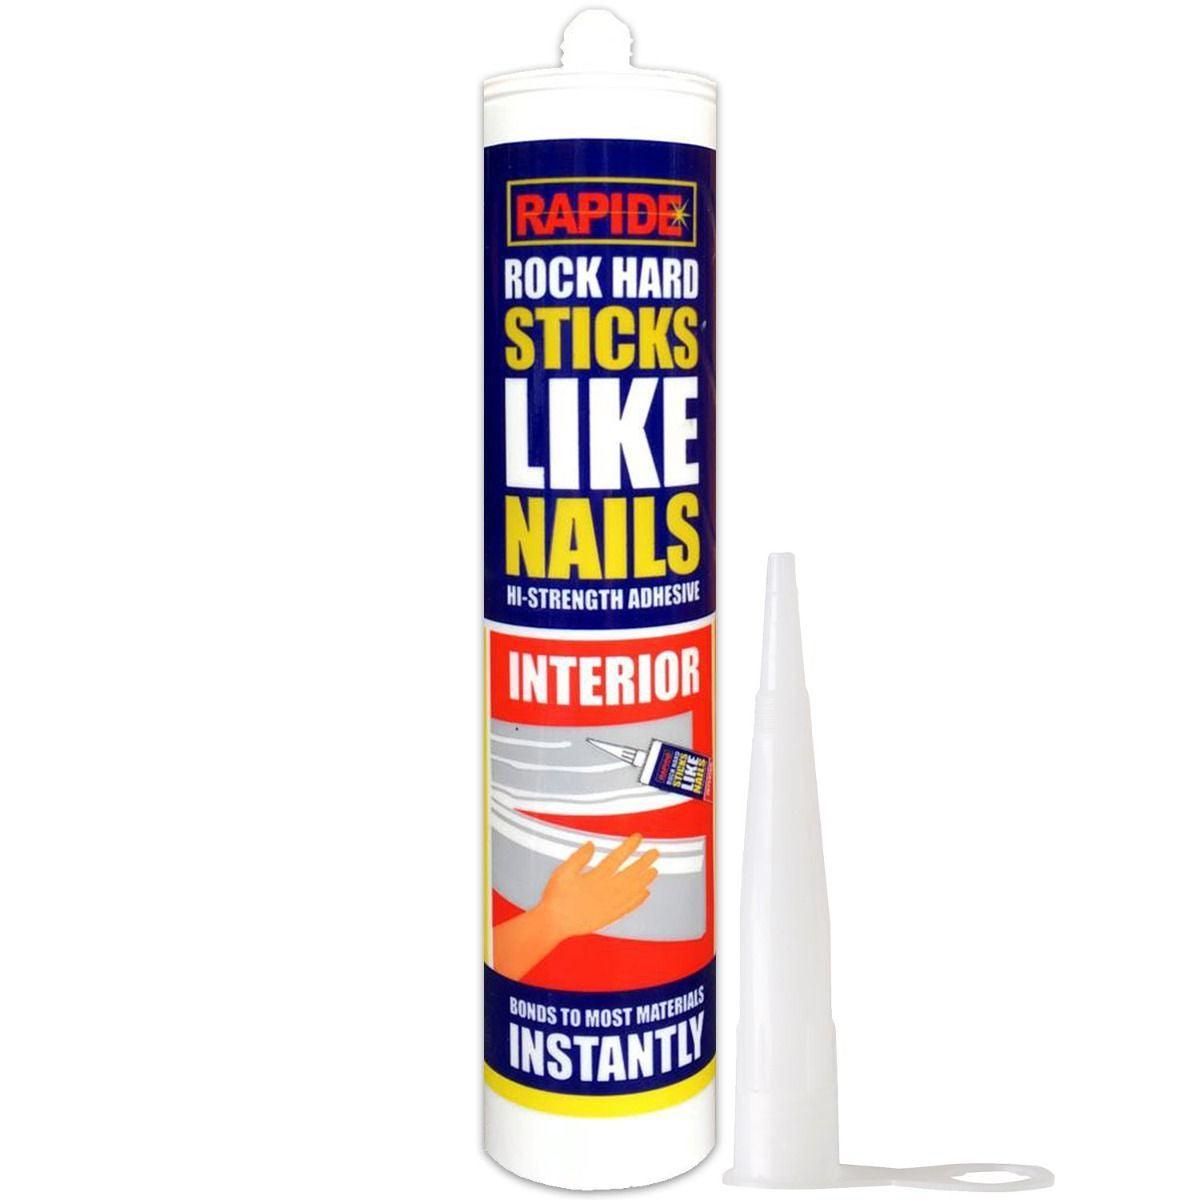 Rapide Sticks Like Nails Interior High Strength Adhesive | 280ml - Choice Stores